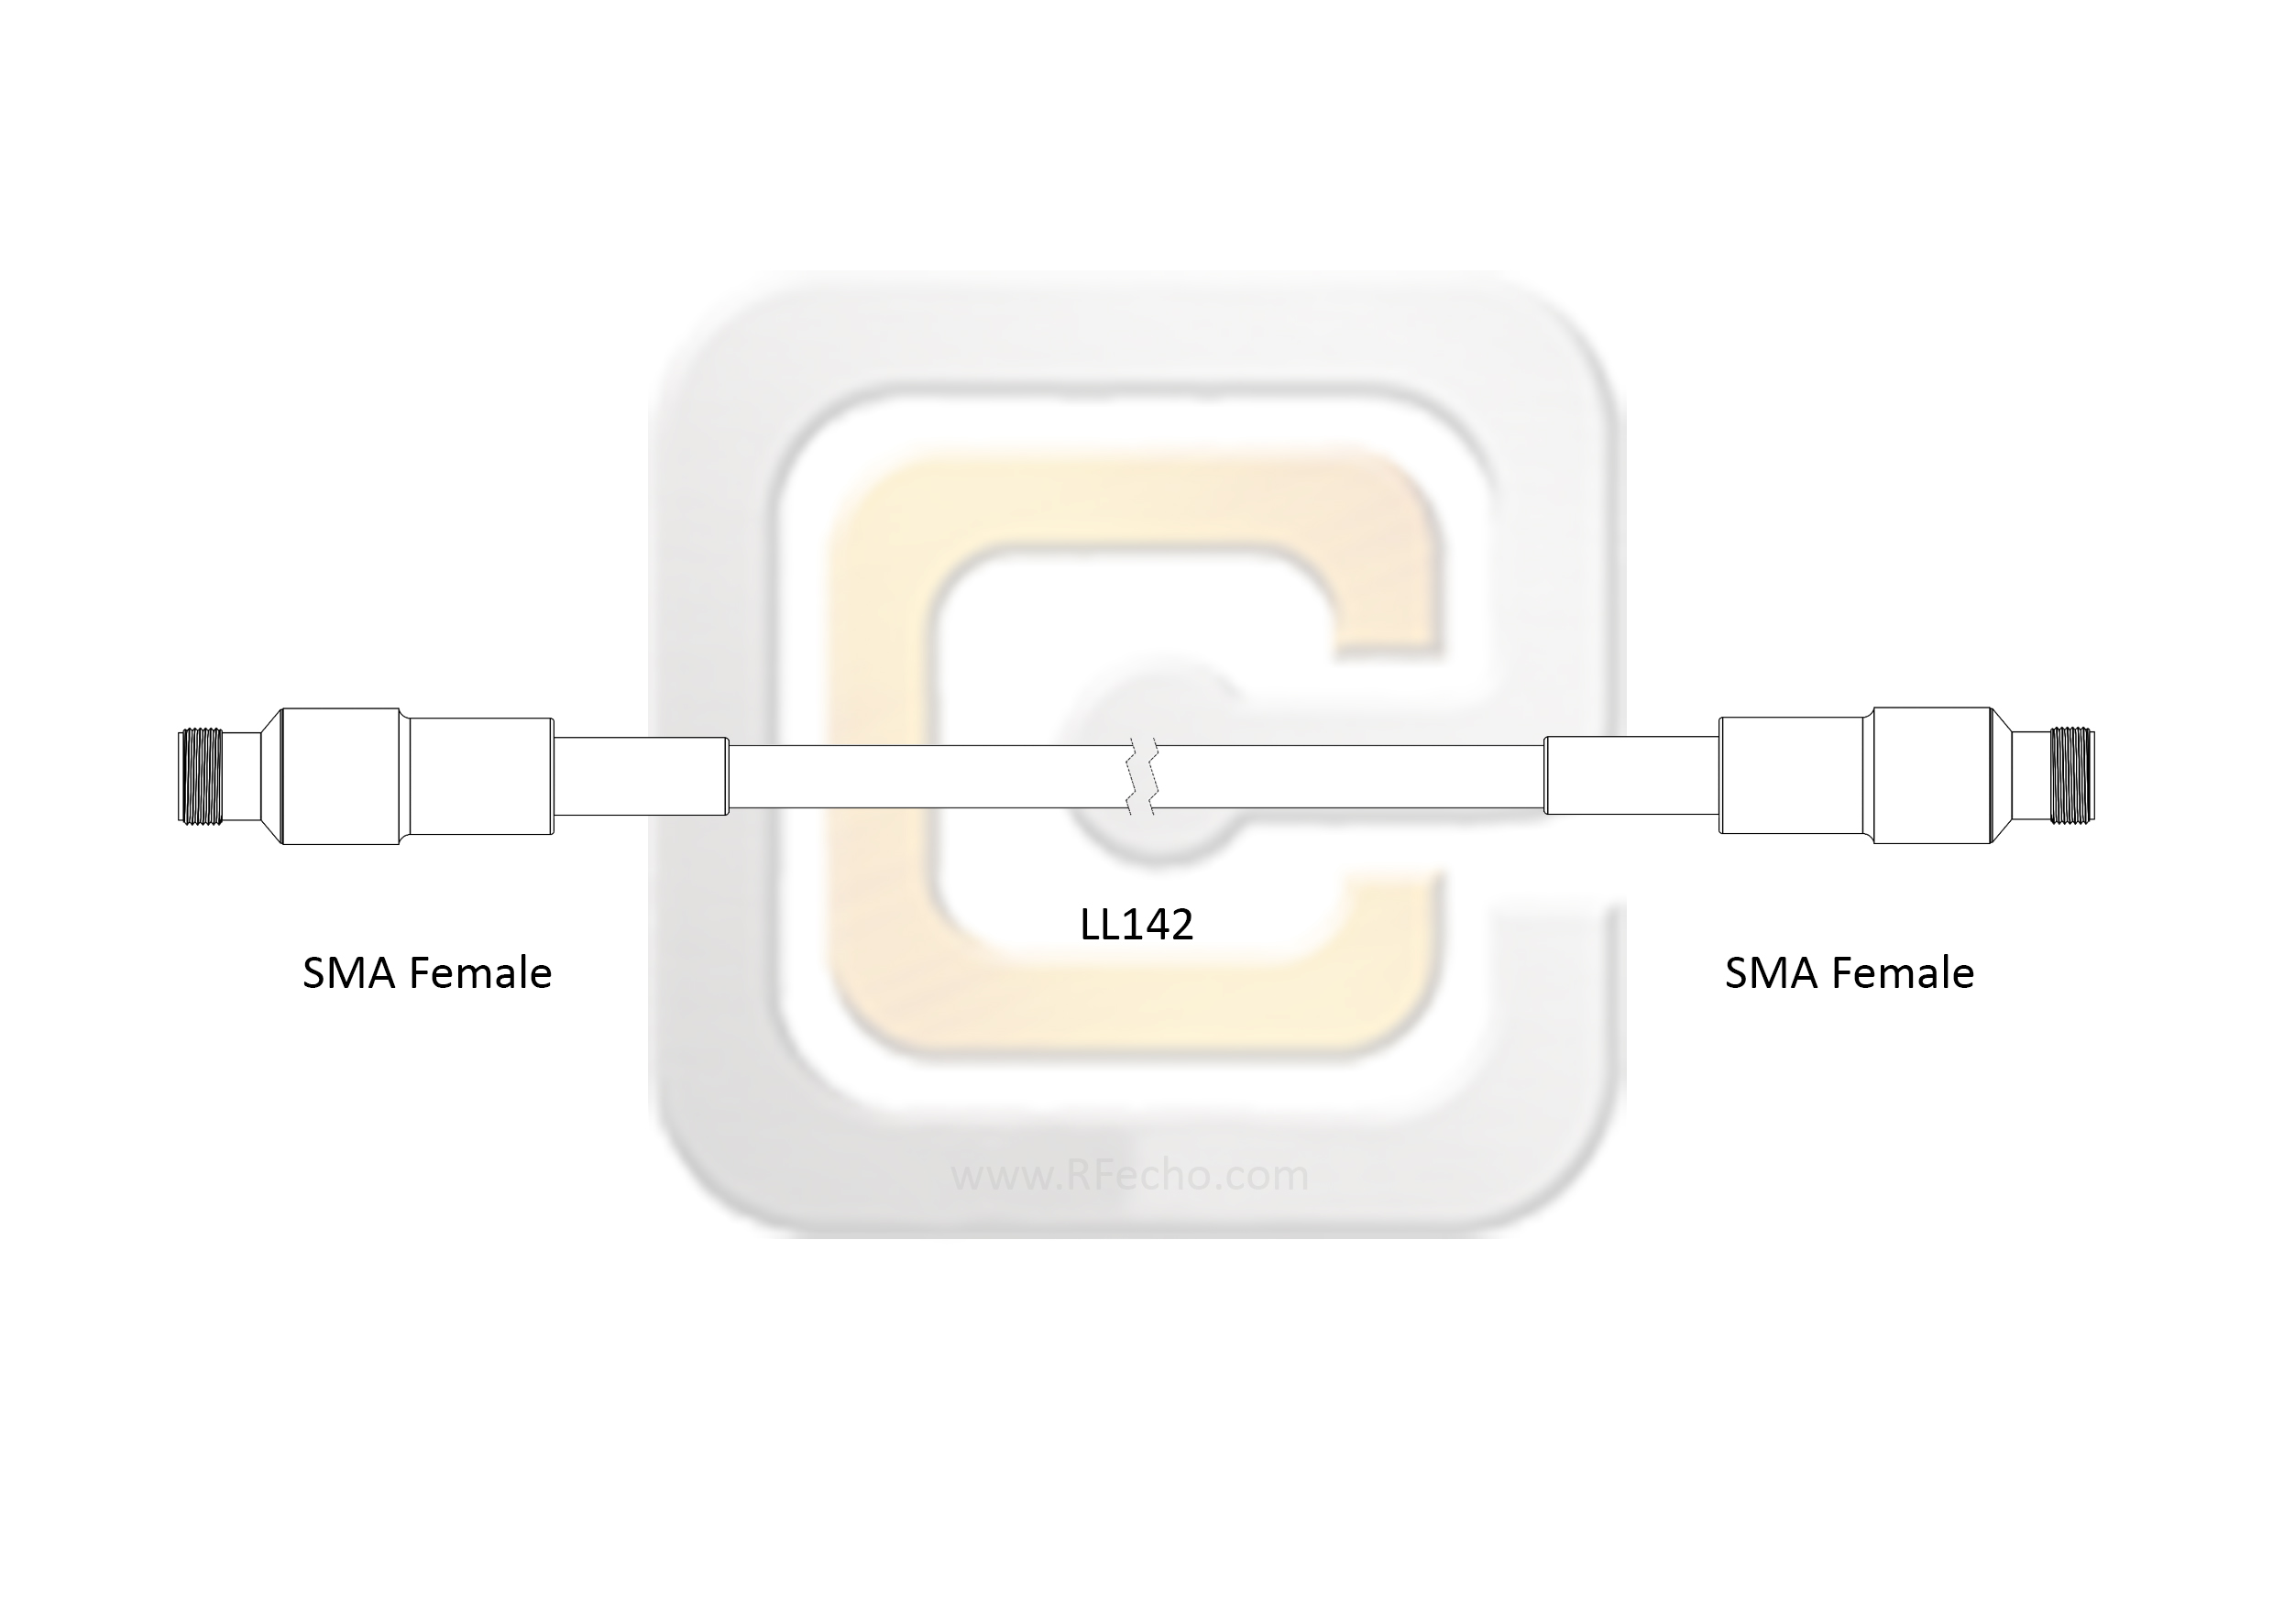 Low Loss SMA Female to SMA Female, 26.5 GHz, composite LL142 Coax and RoHS